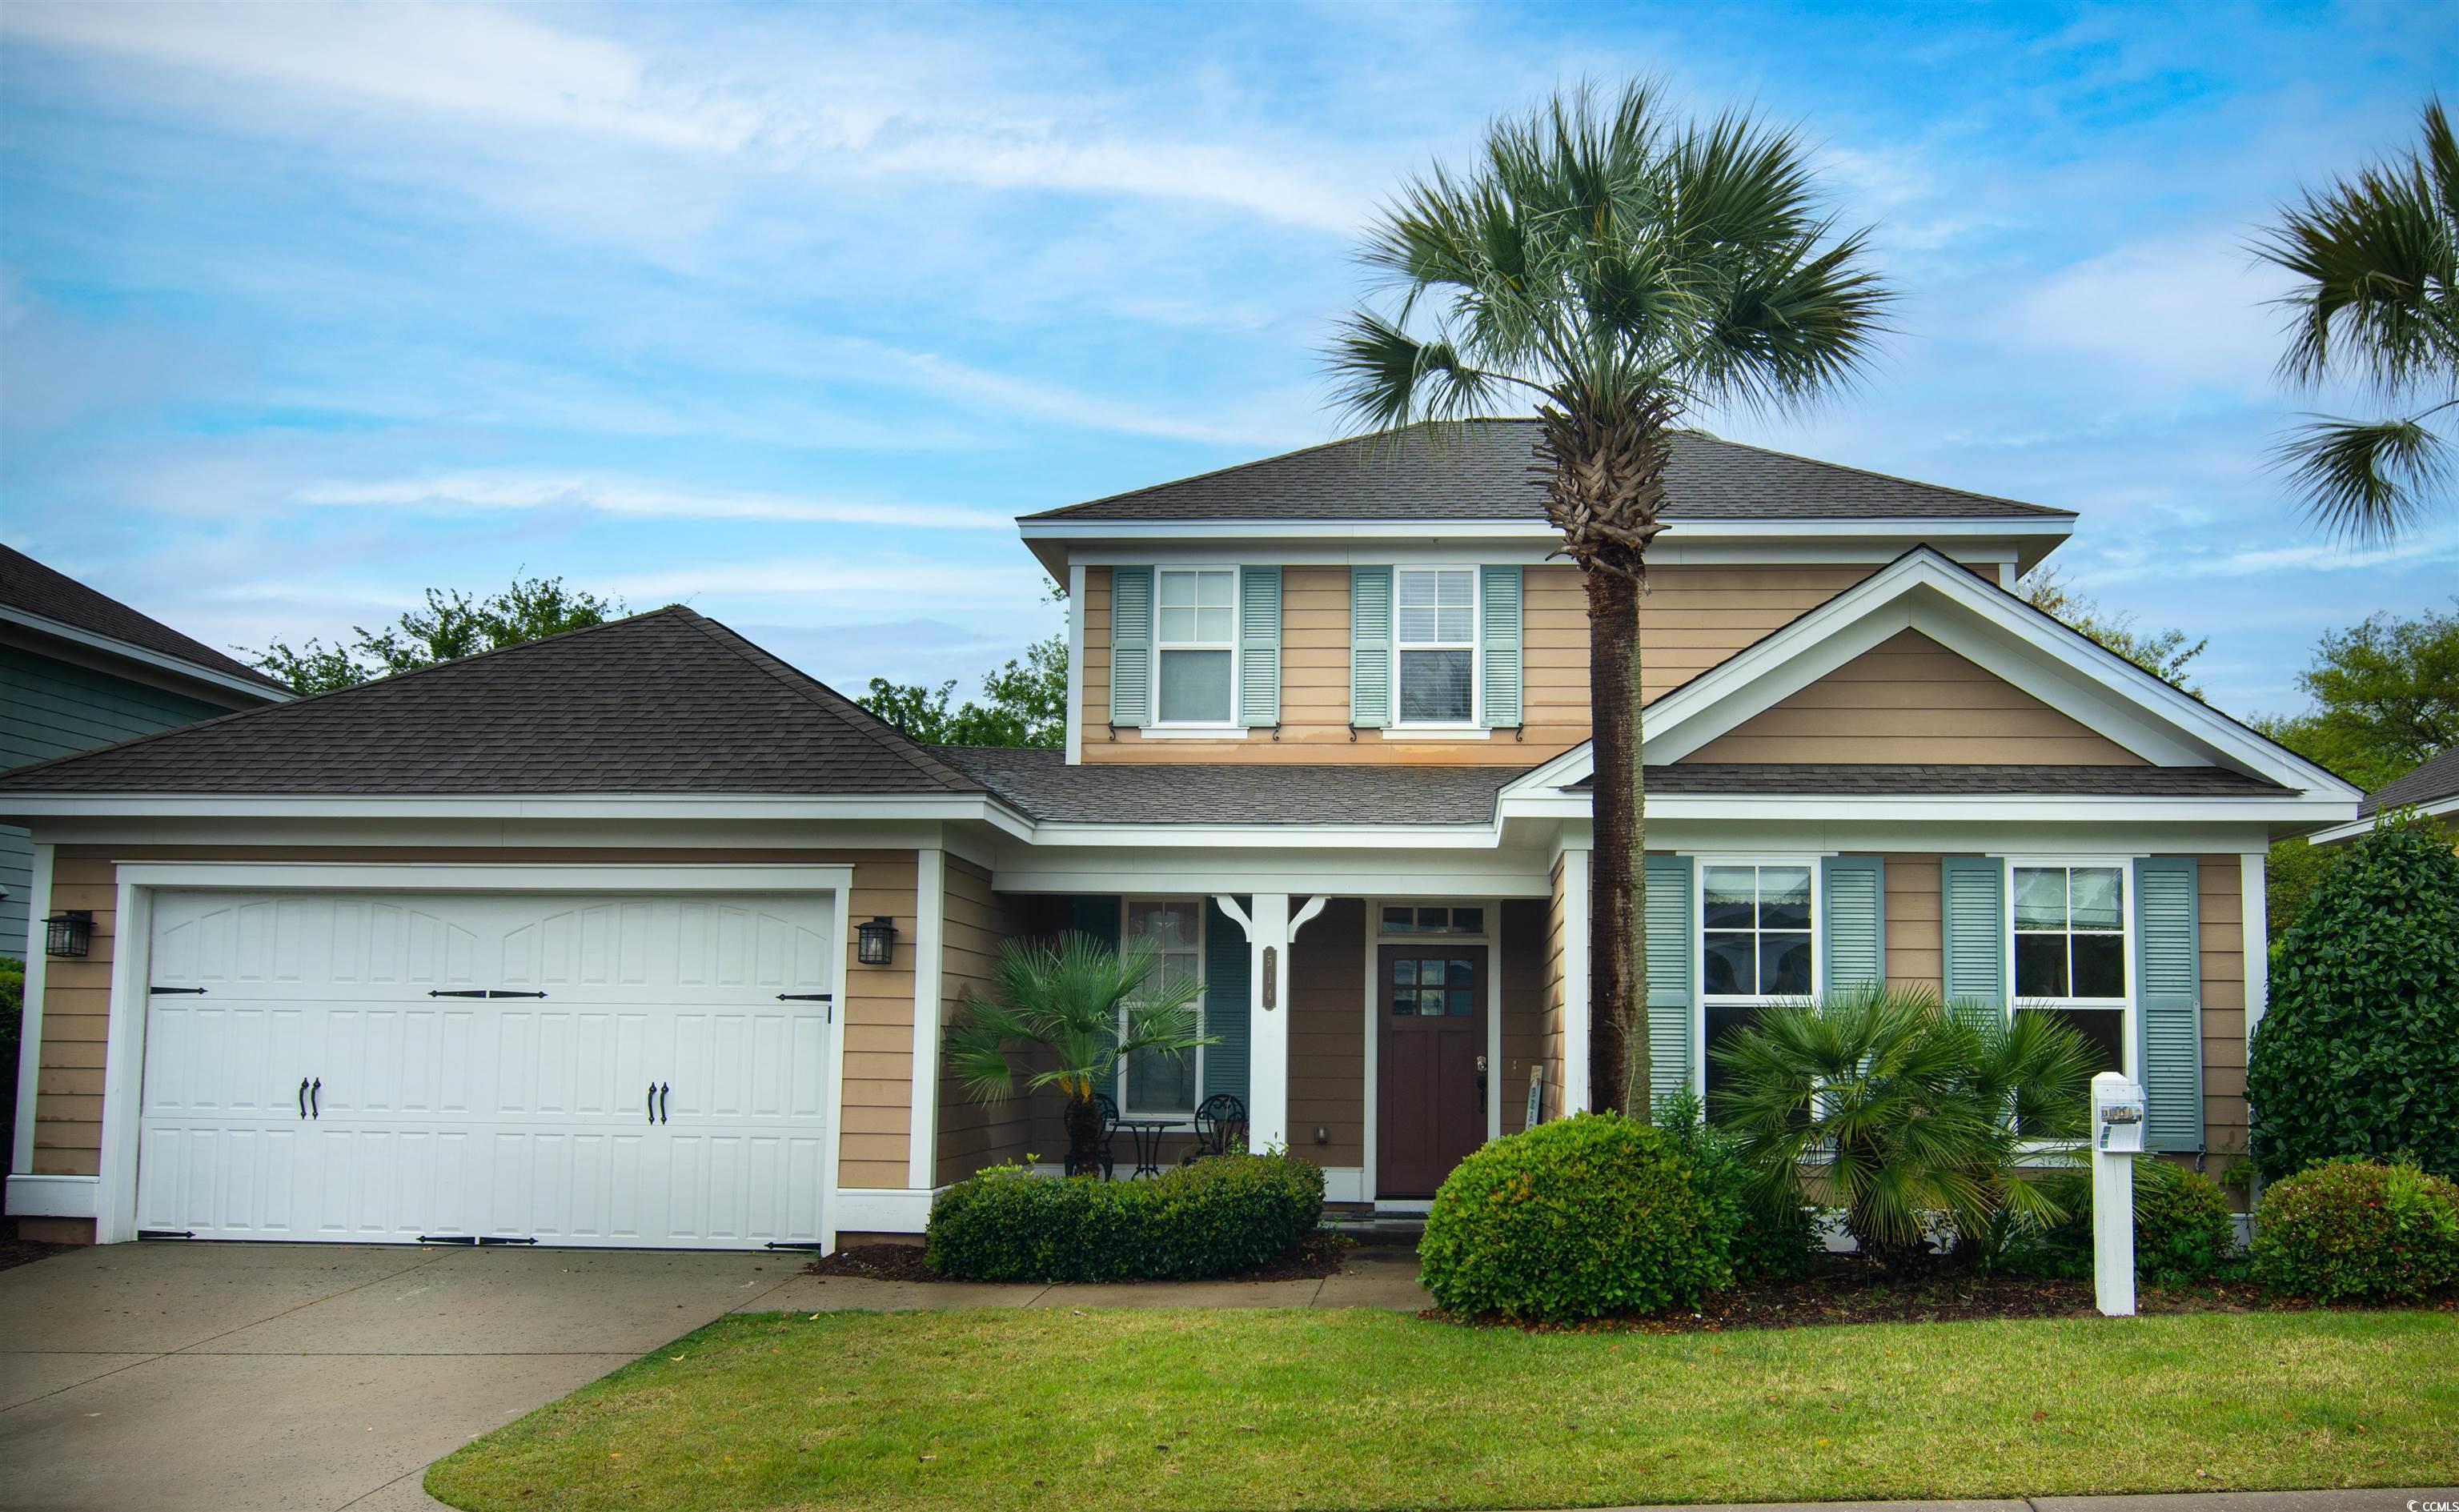 Photo one of 514 Olde Mill Dr. North Myrtle Beach SC 29582 | MLS 2407756